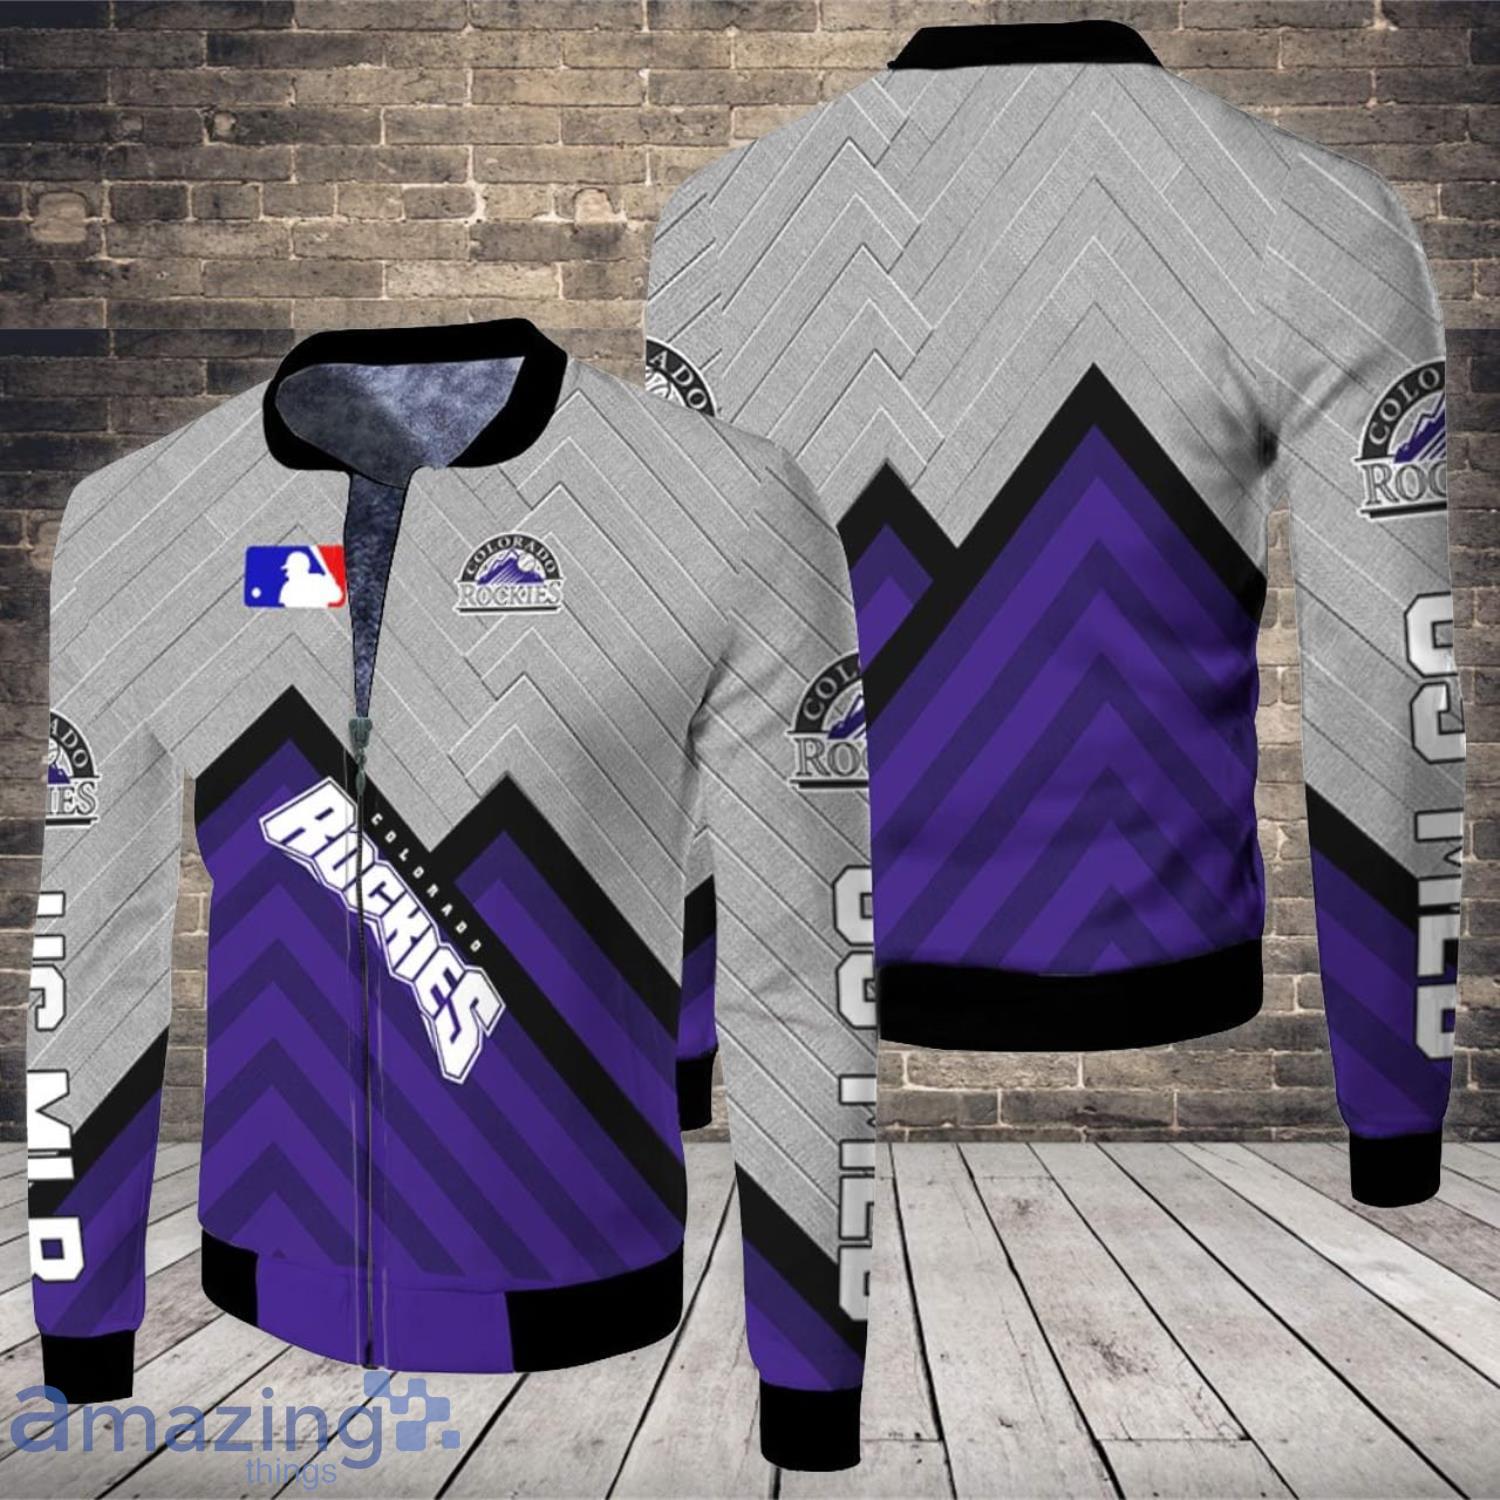 Rockies have been wearing different shades of purple and they